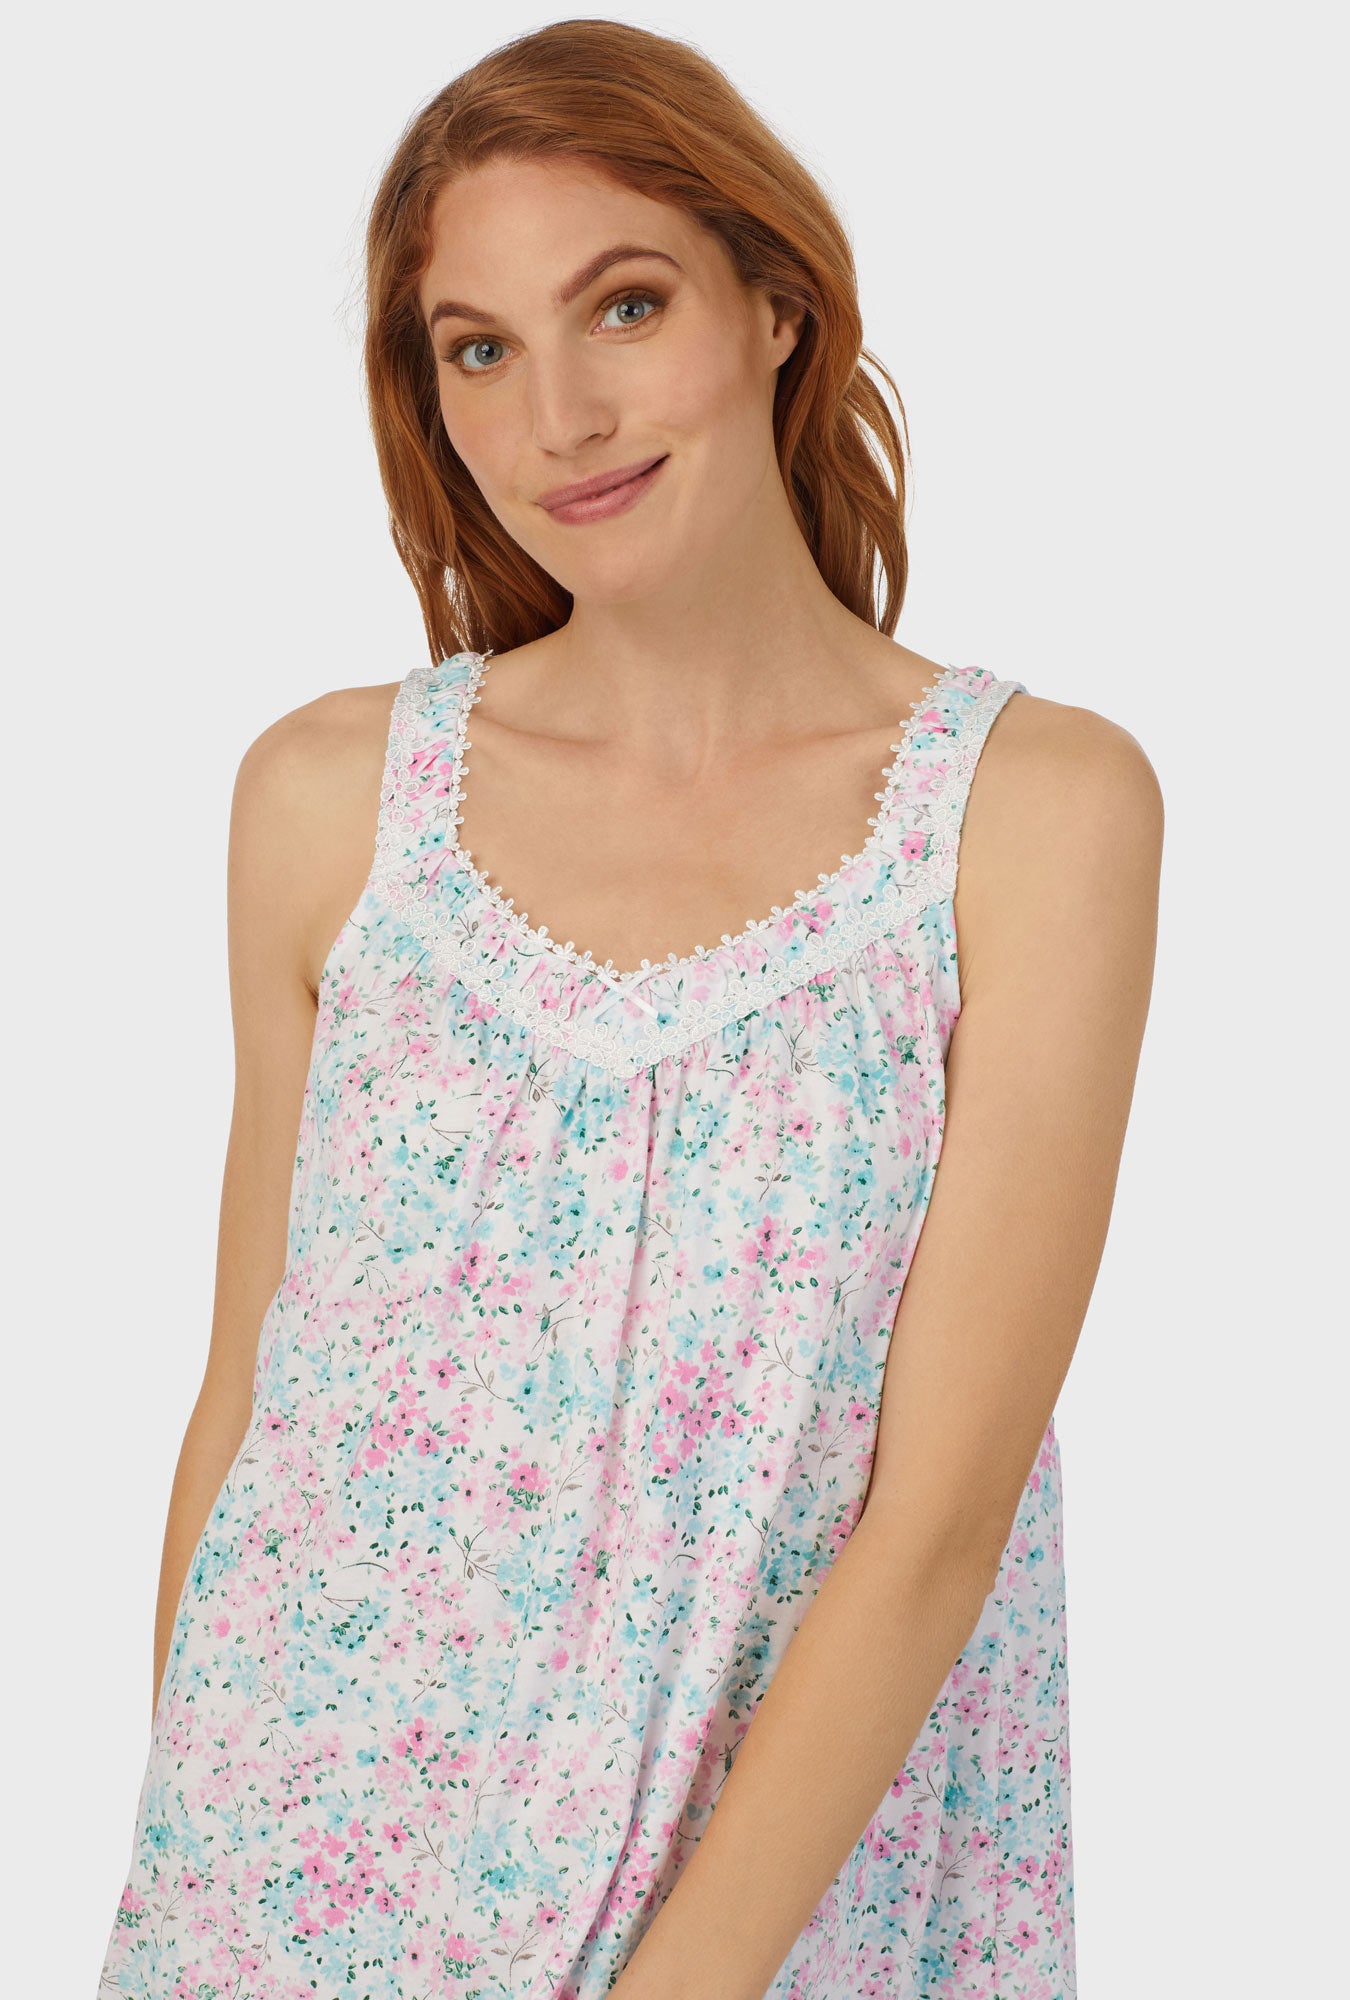 A lady wearing multi color sleeveless chemise with aqua and pink floral print.